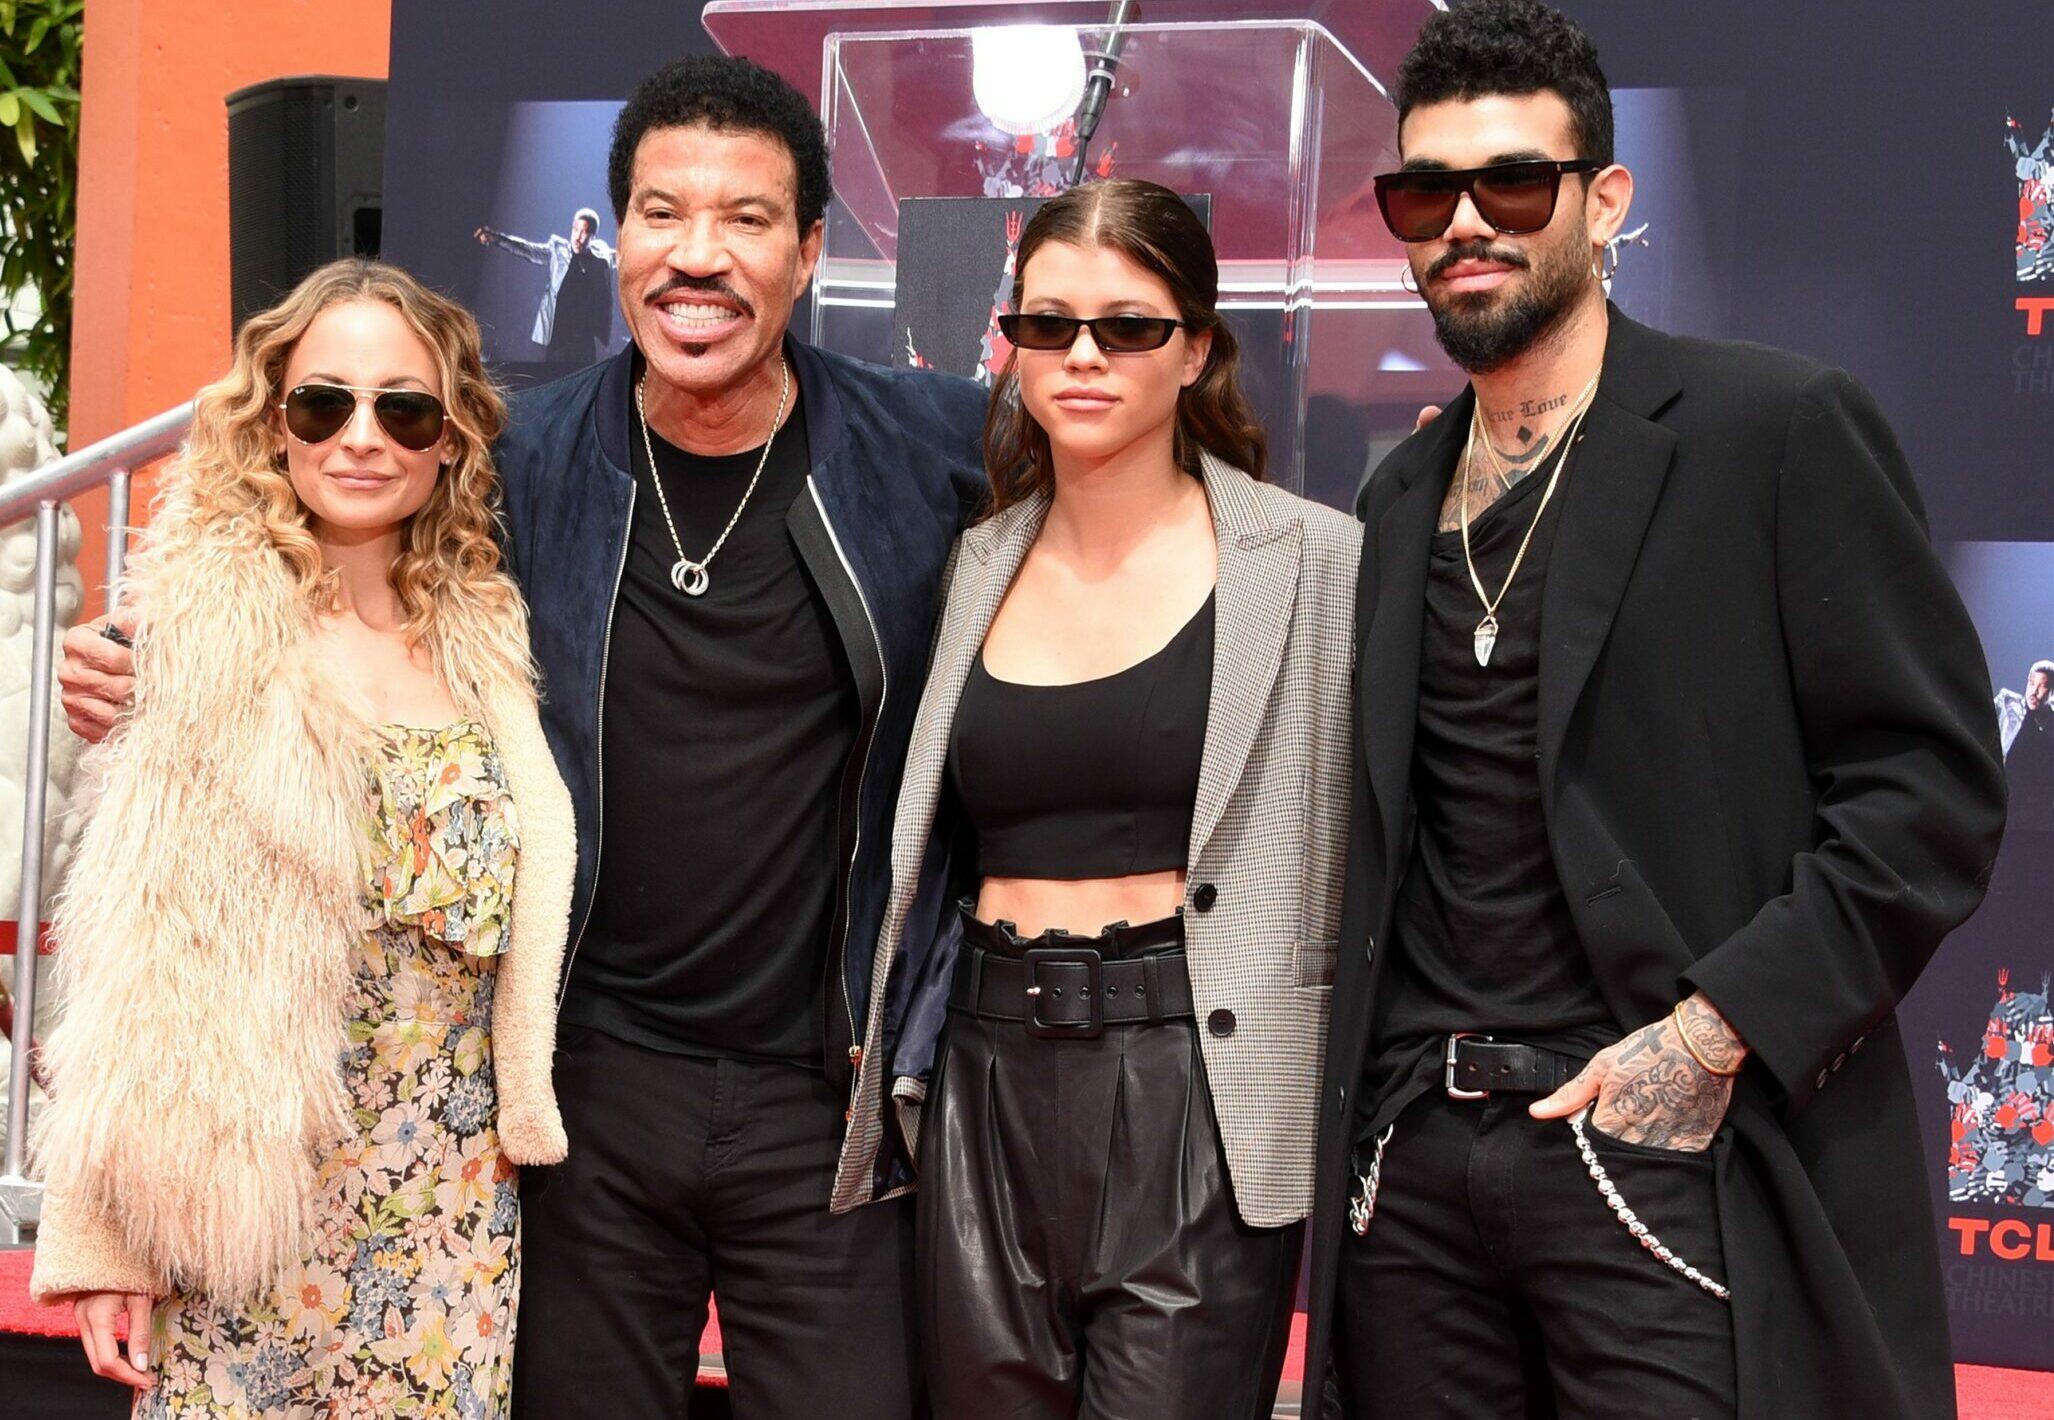 Lionel Richie Handprints and Footprints at the Lionel Richie Hand and Footprints Ceremony at the TCL Chinese Theatre on March 7, 2018 in Hollywood, Ca. Pictured: Nicole Richie, Lionel Richie, Sofia Richie and Miles Richie. 